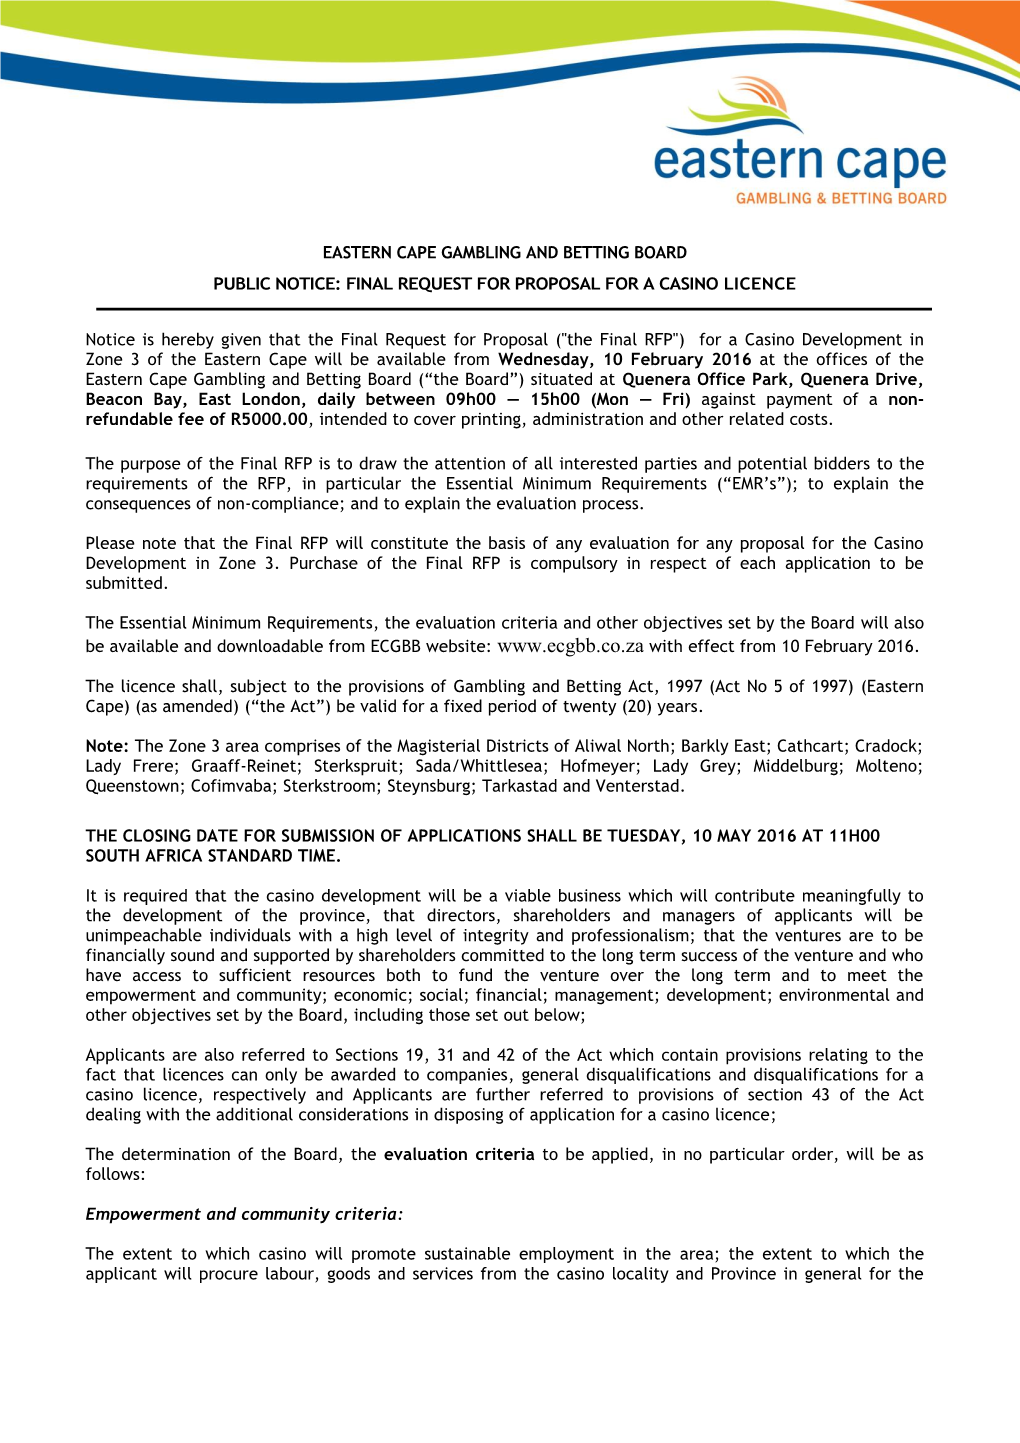 Eastern Cape Gambling and Betting Board Public Notice: Final Request for Proposal for a Casino Licence